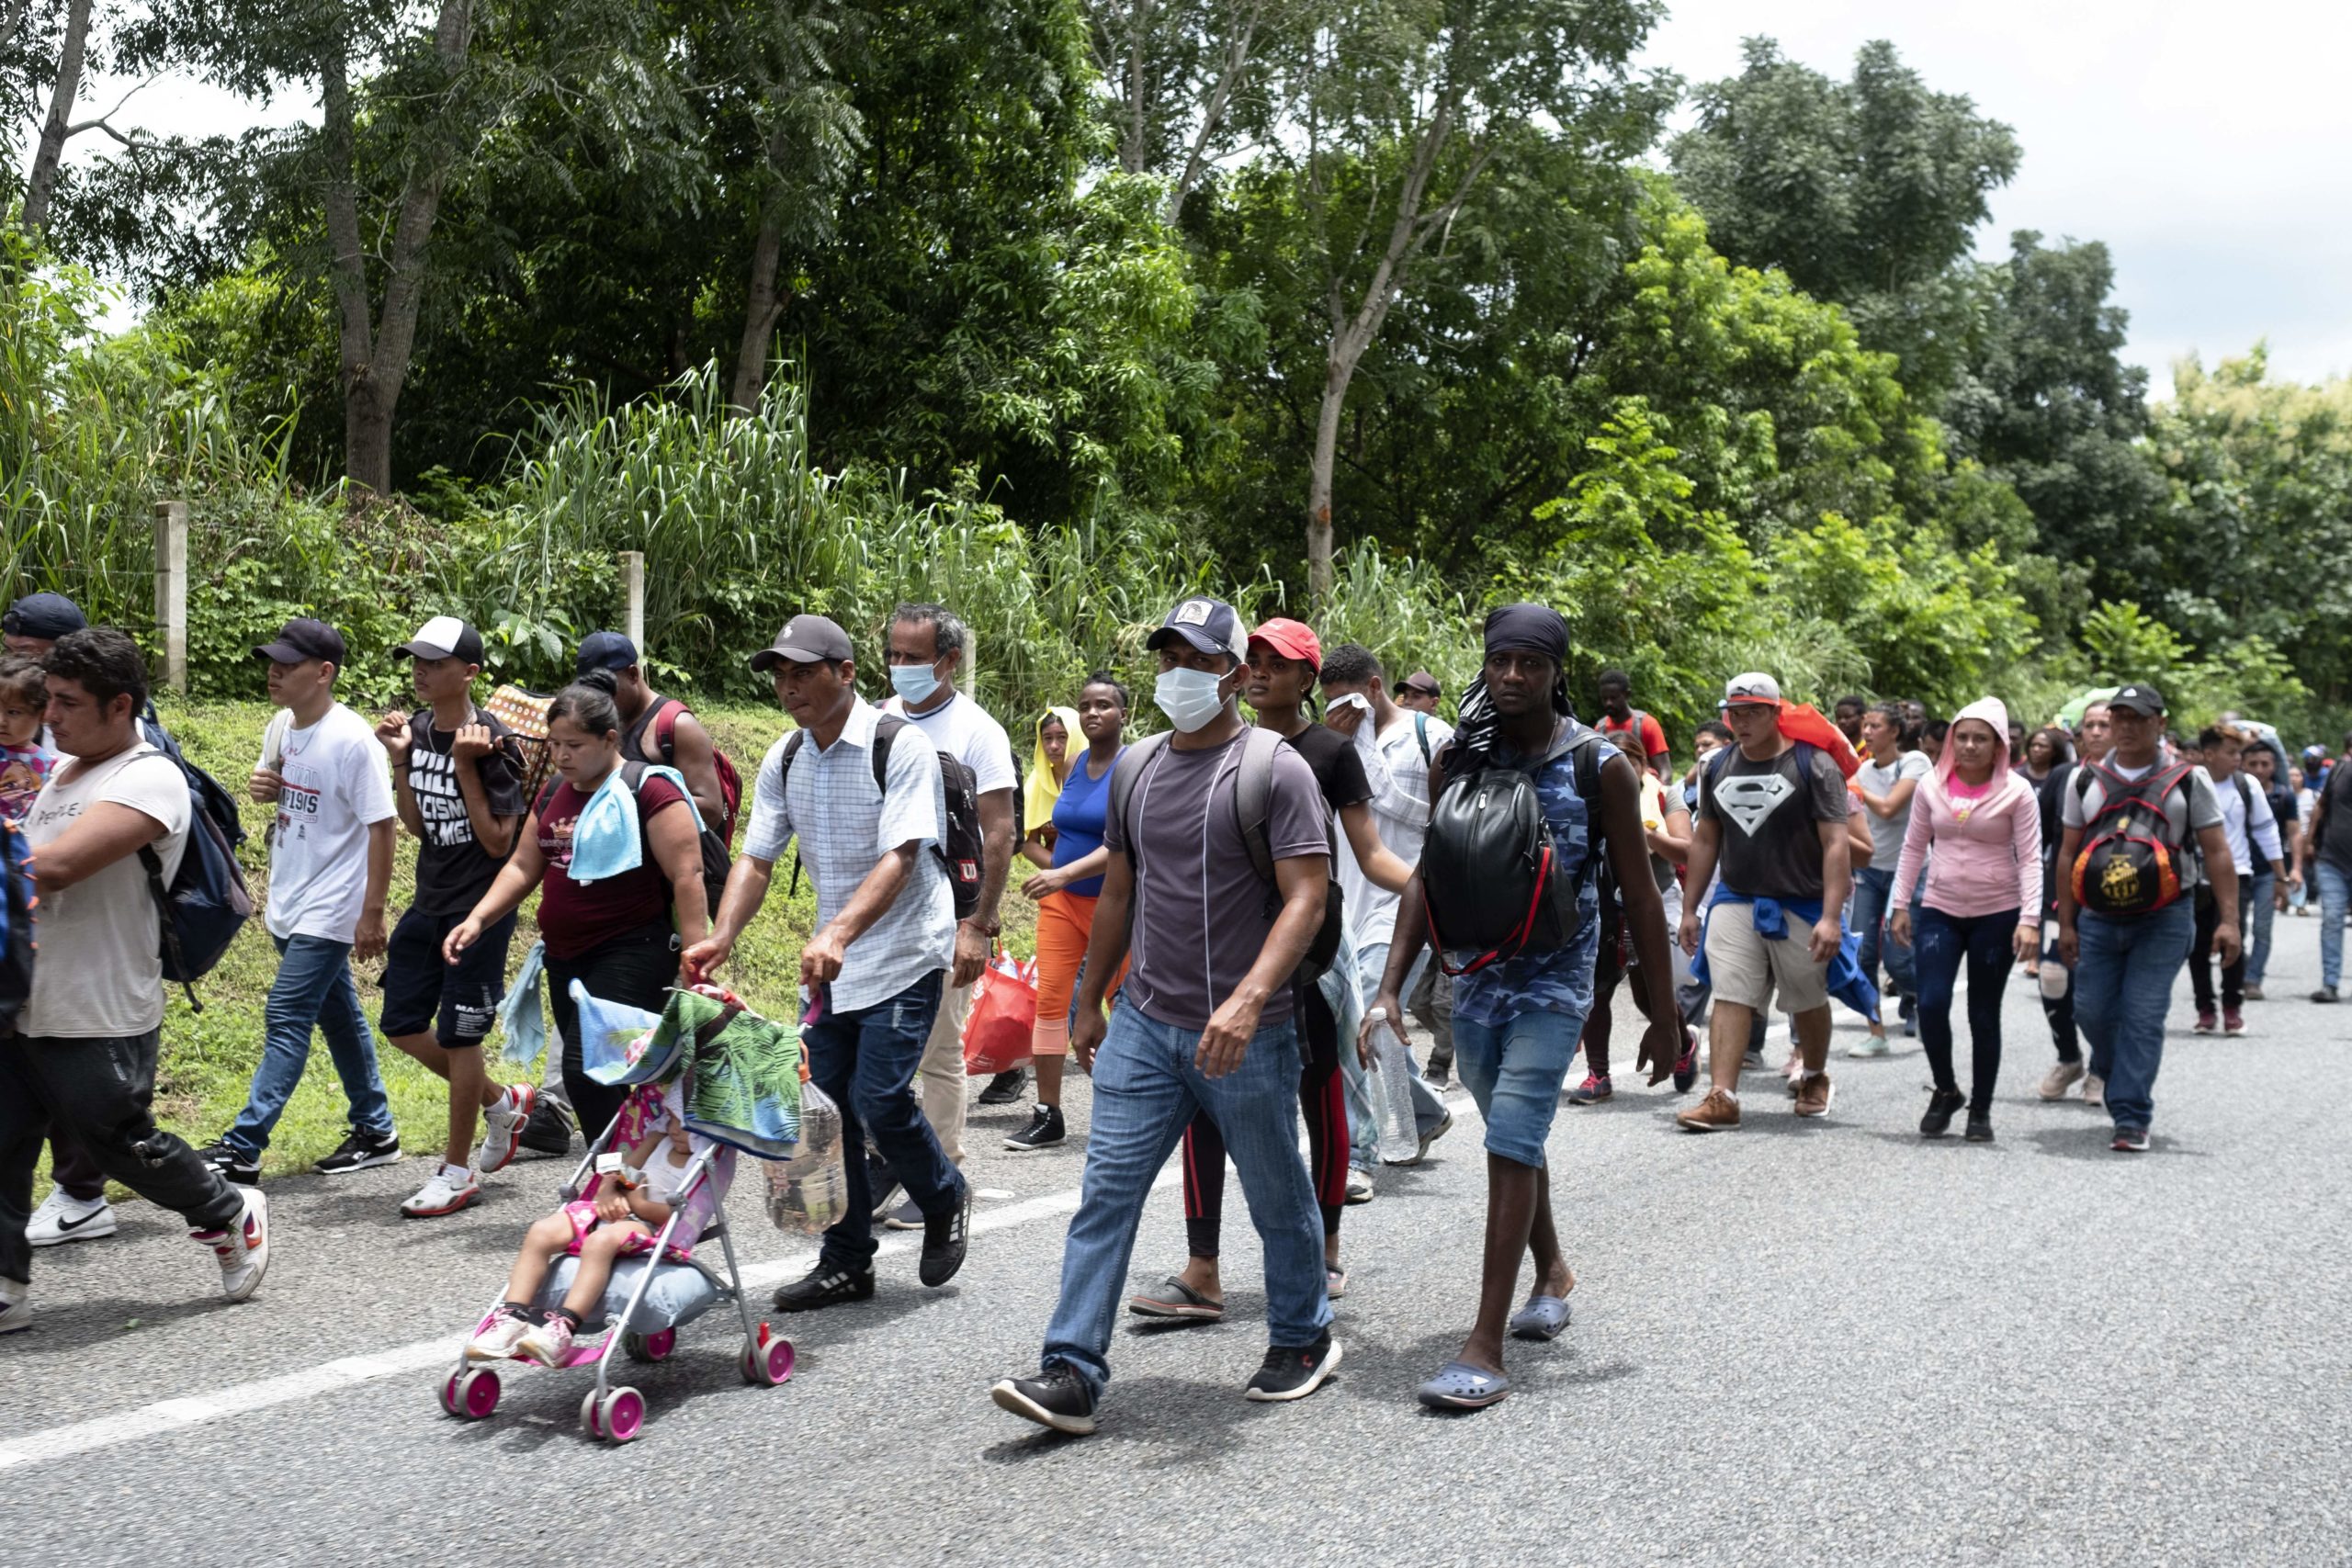 Central American and Haitian migrants are seen heading in a caravan to the US, in Tapachula, Chiapas State, Mexico, on September 4, 2021. (Photo by JACKY MUNIELLO/AFP via Getty Images)